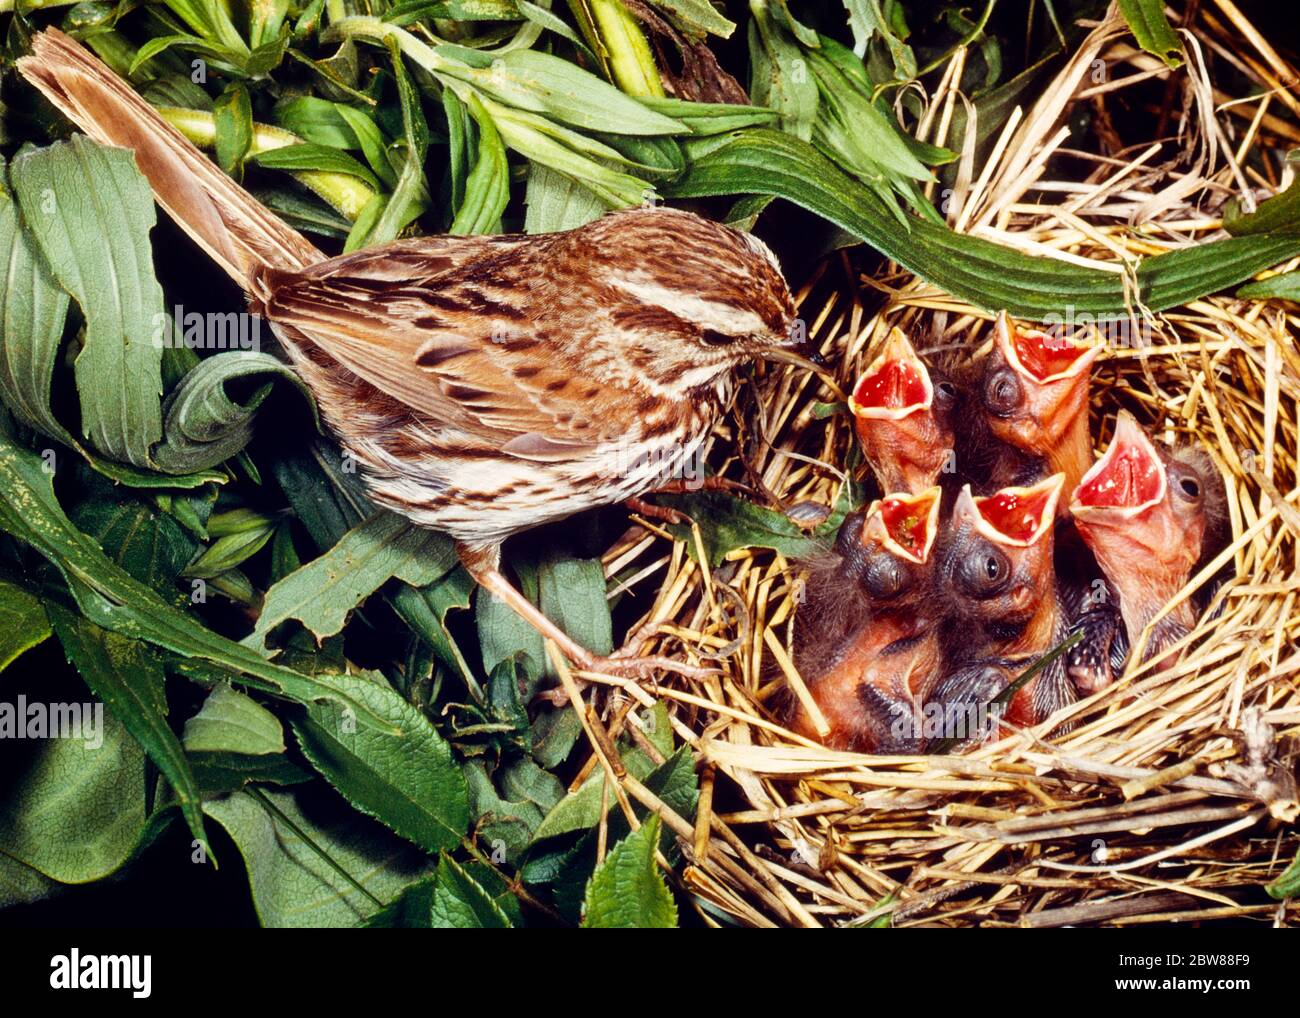 1980s One Adult Song Sparrow Melospiza Melodia Feeding Hungry Hatchlings In Nest Eastern Half Of North America Kb Lan001 Hars Song Voice Vocal Half In Of Connection Conceptual Nourishment Support Vertebrate